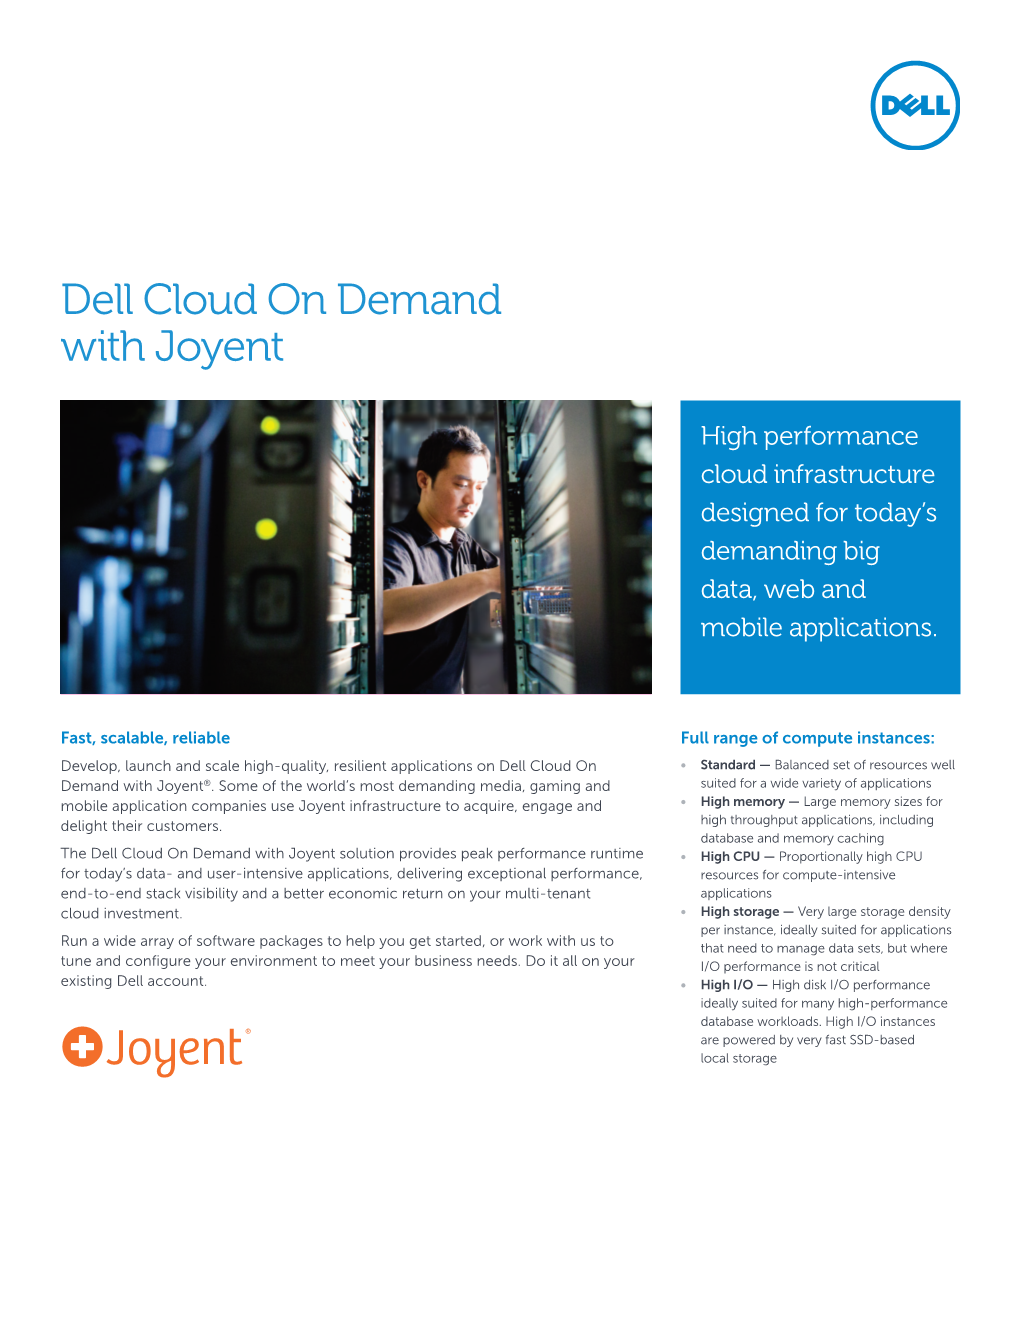 Dell Cloud on Demand with Joyent